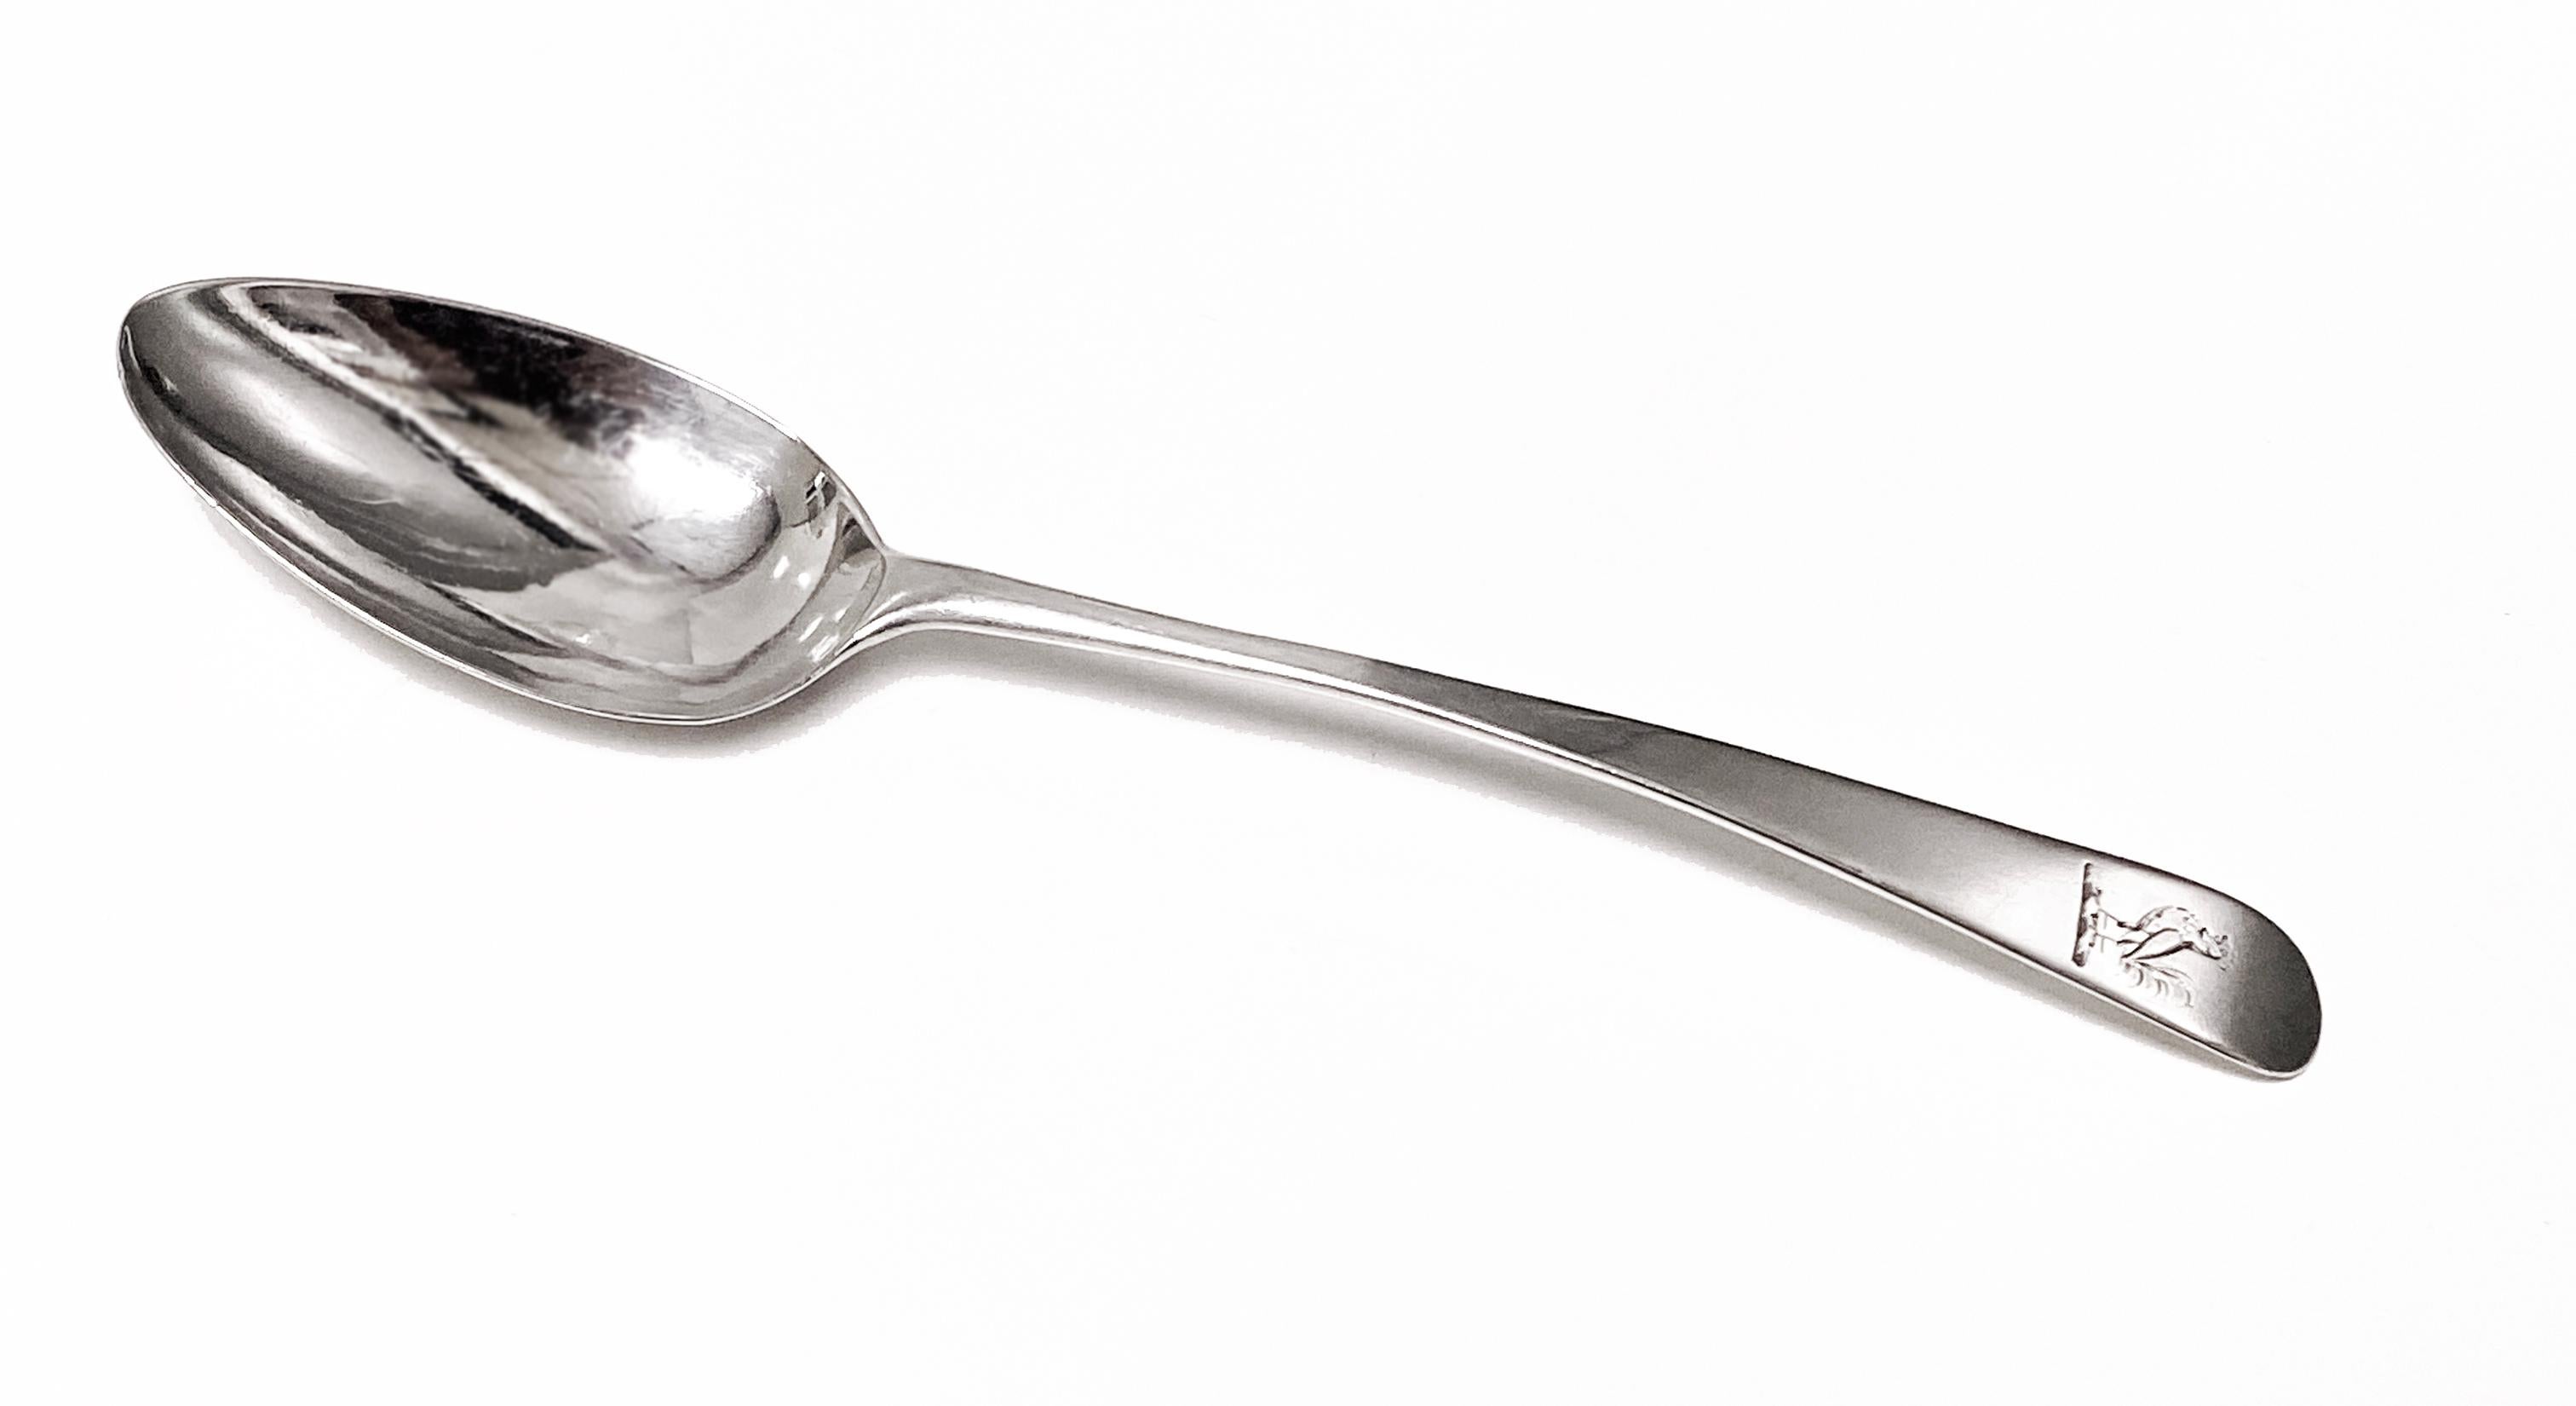 Georgian Silver Hester Bateman Spoon London 1784. Interesting as it was the first London duty mark. Old English pattern, engraved crest of a rooster. Length: 6.75 inches. Weight: 29 grams. Good condition lovely patina. Reflections from photography